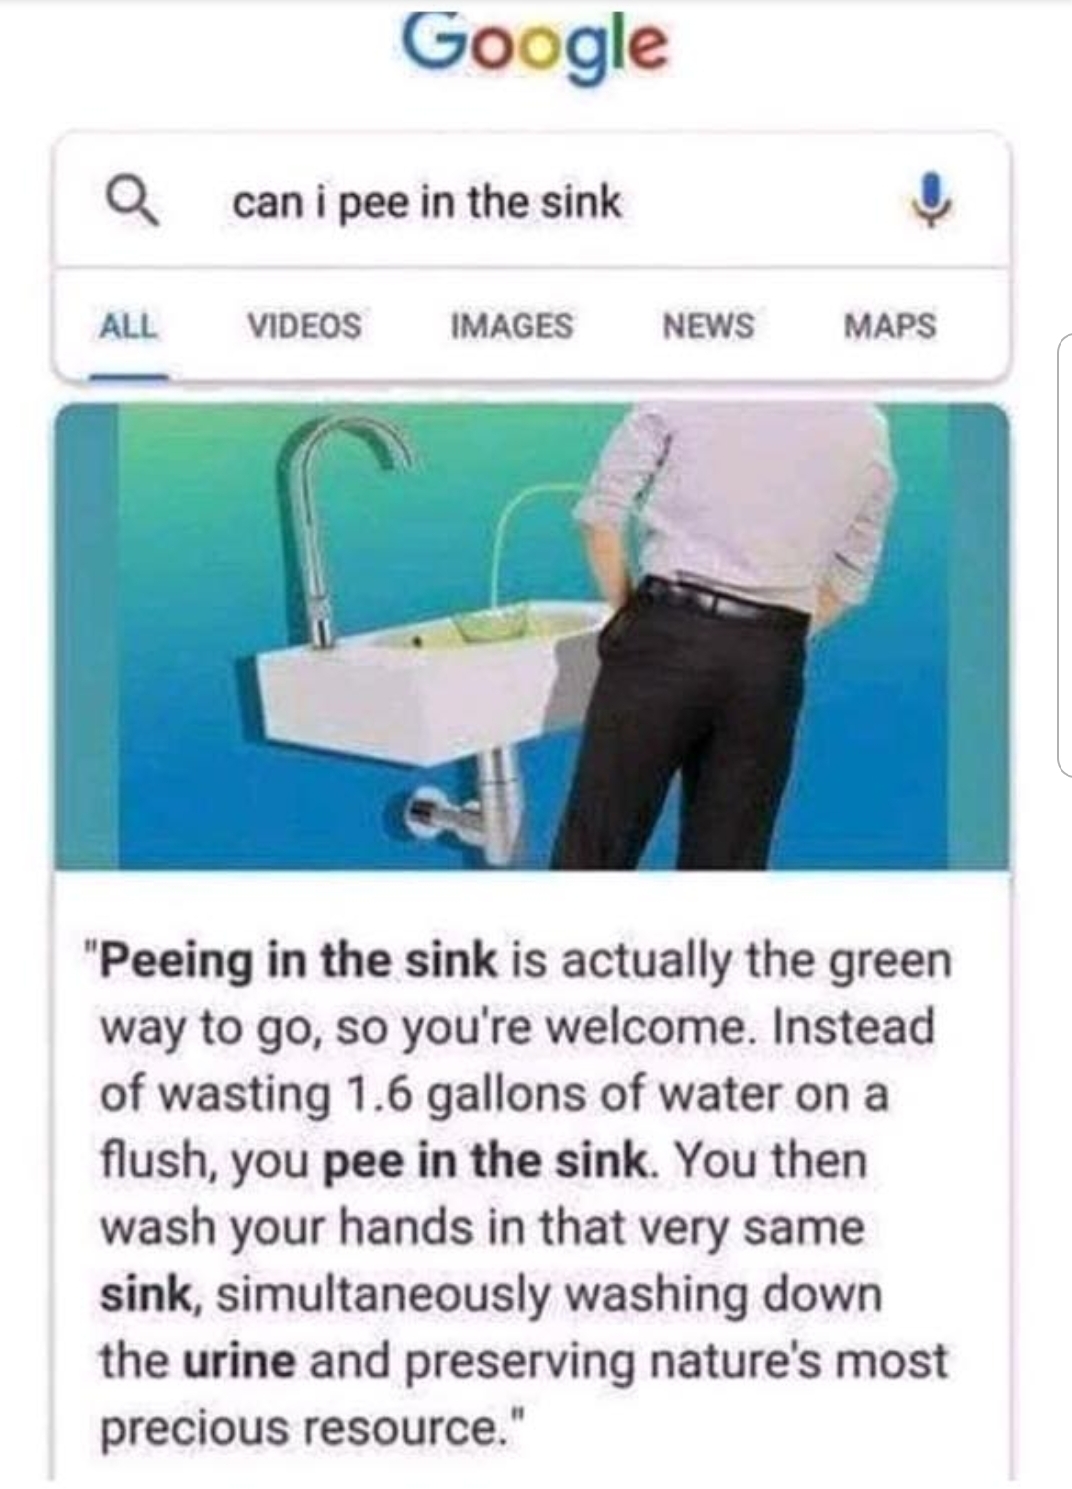 multimedia - Google a can i pee in the sink All Videos Images News Maps "Peeing in the sink is actually the green way to go, so you're welcome. Instead of wasting 1.6 gallons of water on a flush, you pee in the sink. You then wash your hands in that very 